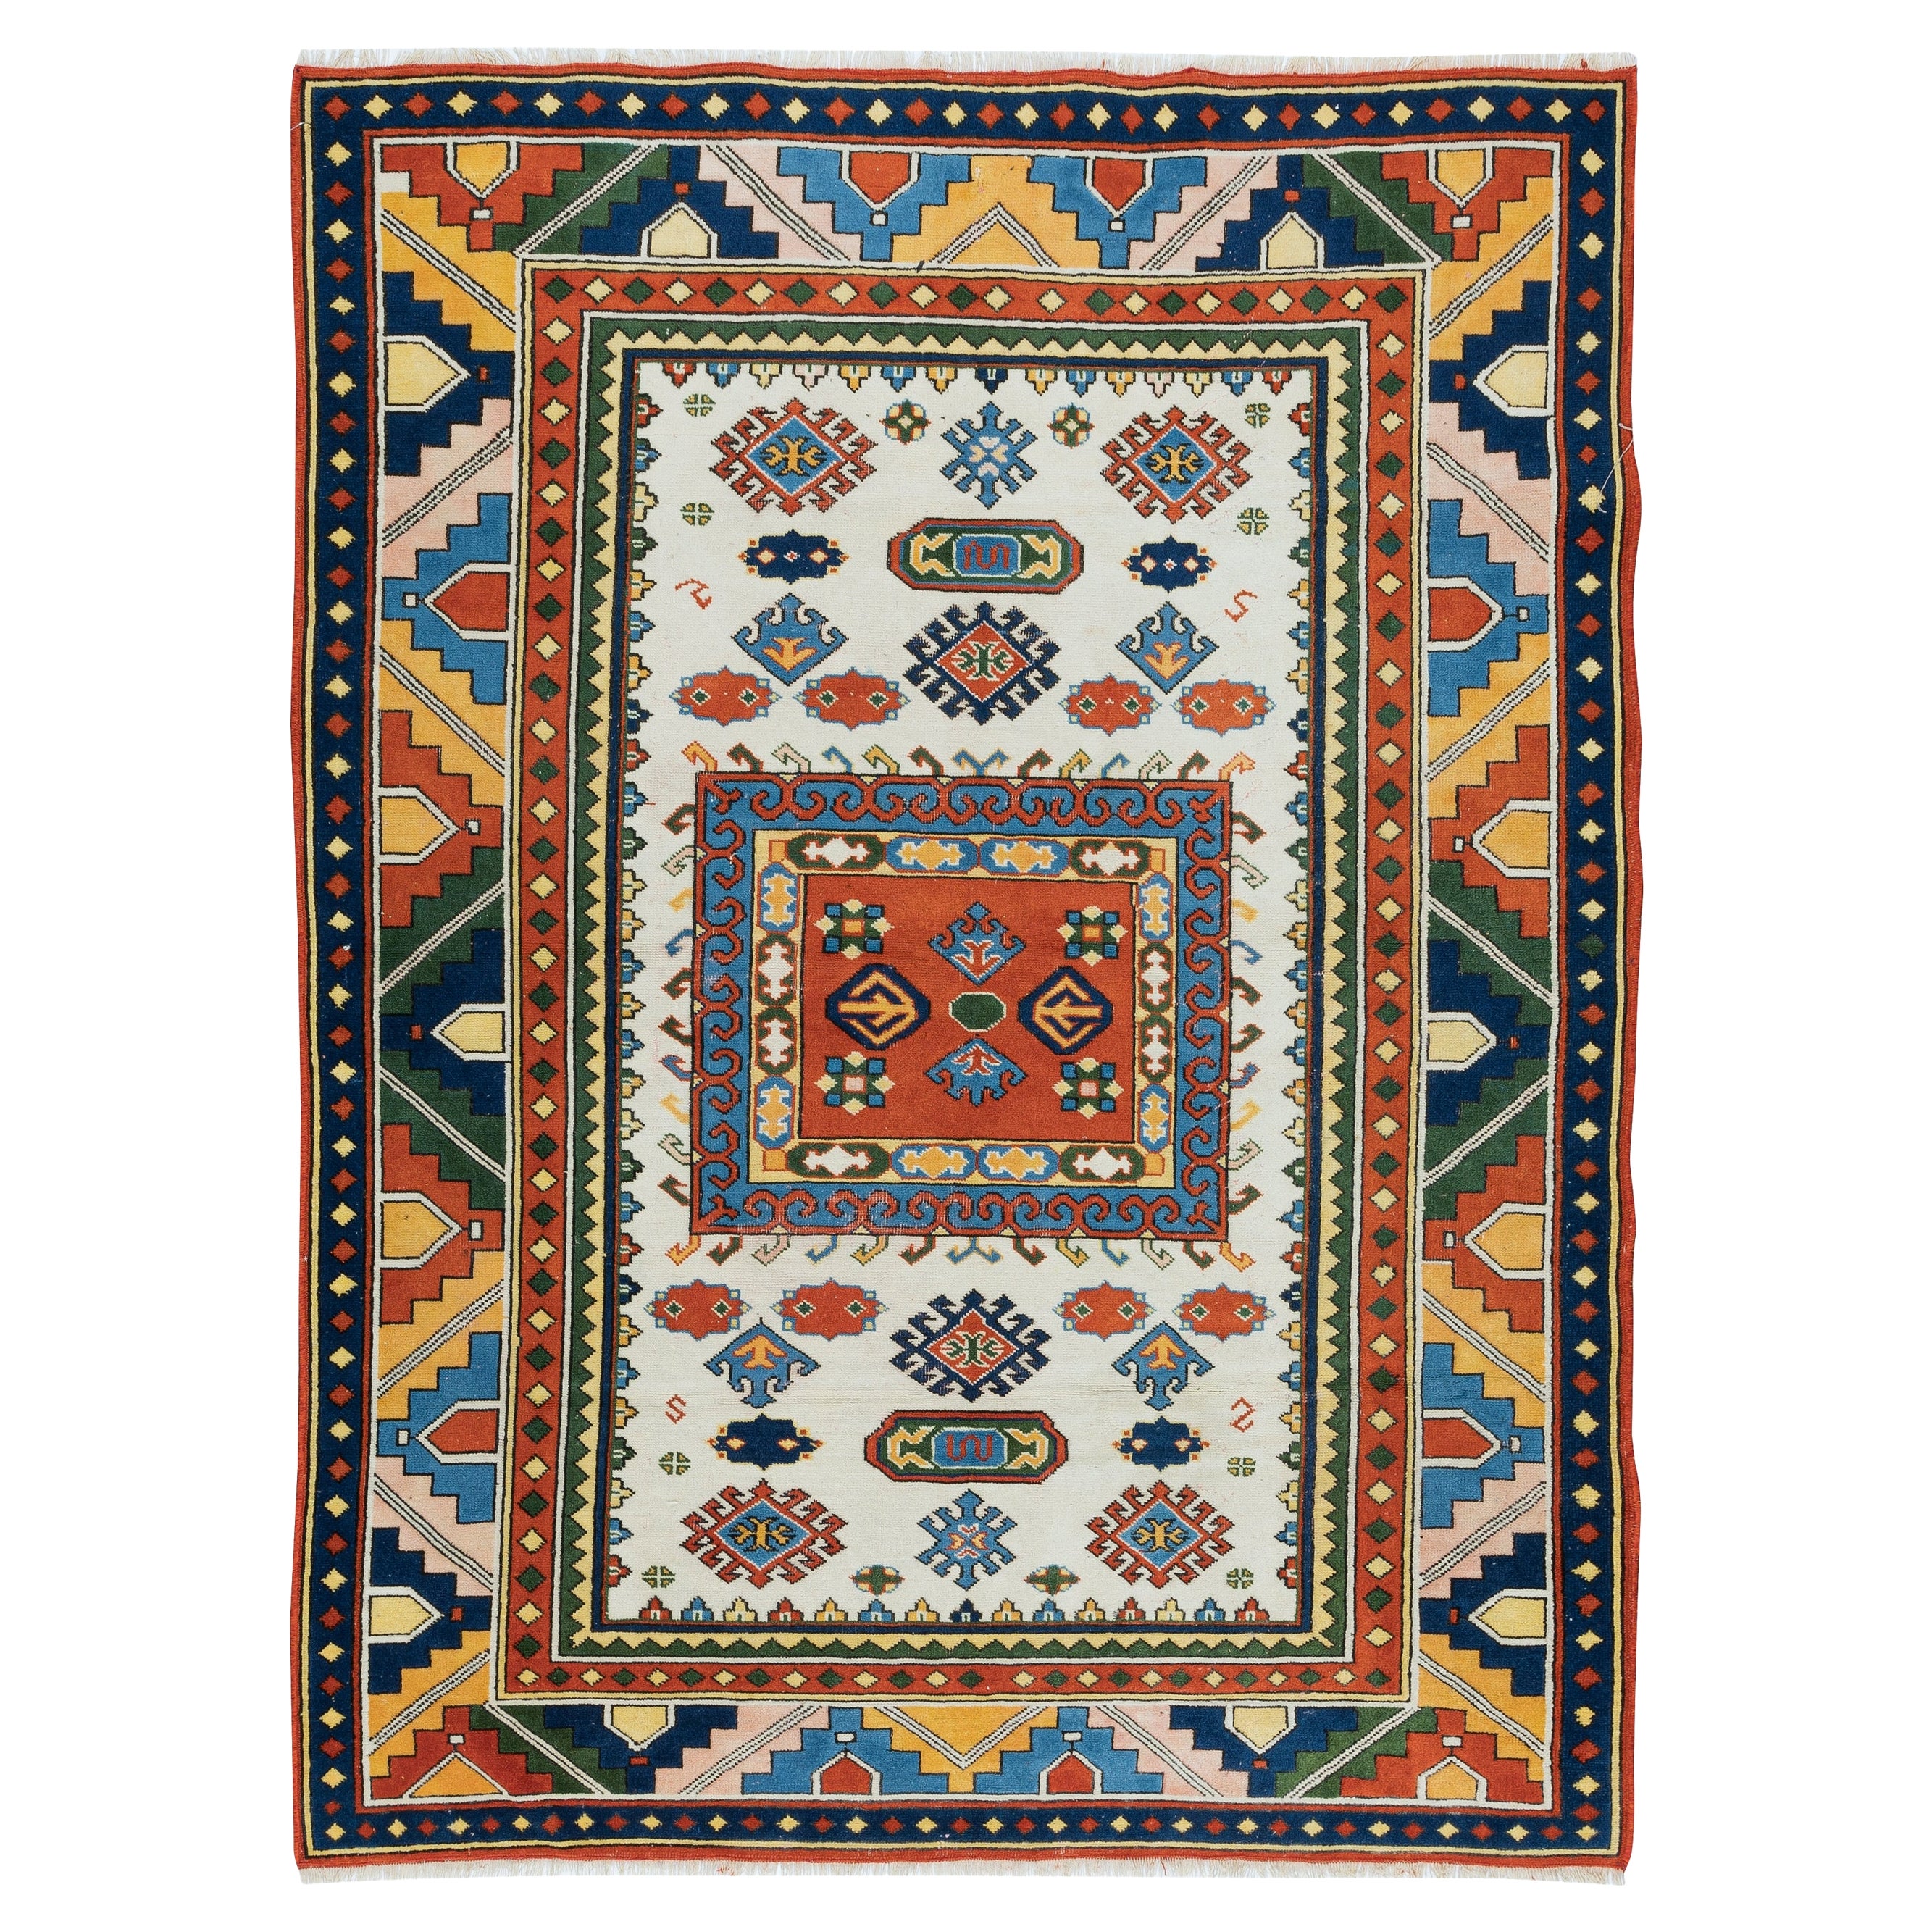 4x5.6 Ft Colorful Accent Rug, Modern Turkish Carpet, Handmade Floor Covering